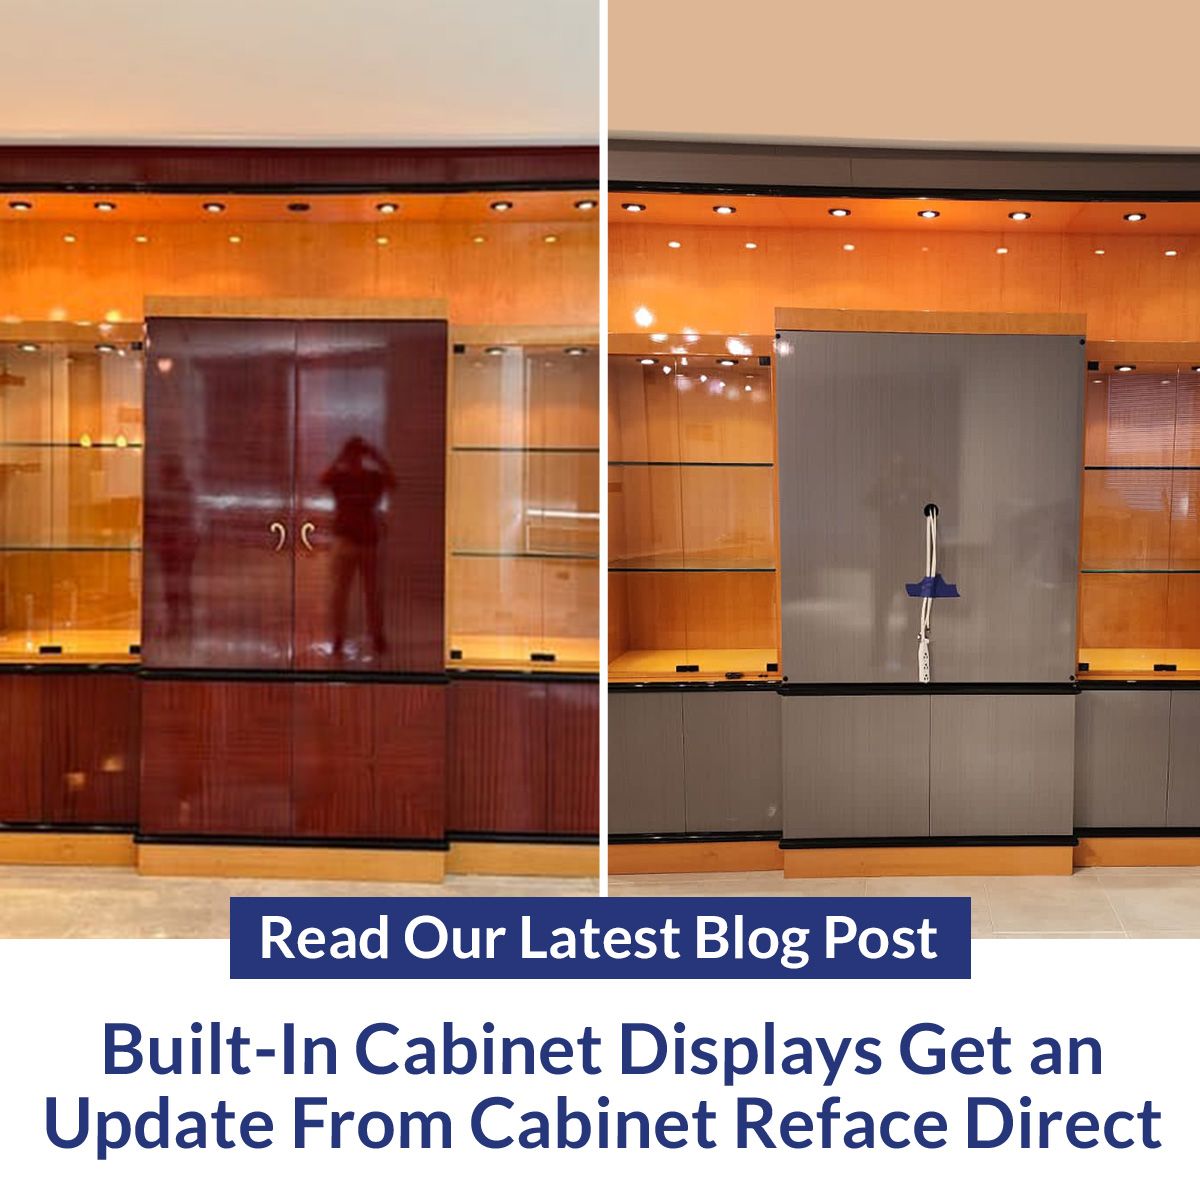 Built-In Cabinet Displays Get an Update From Cabinet Reface Direct